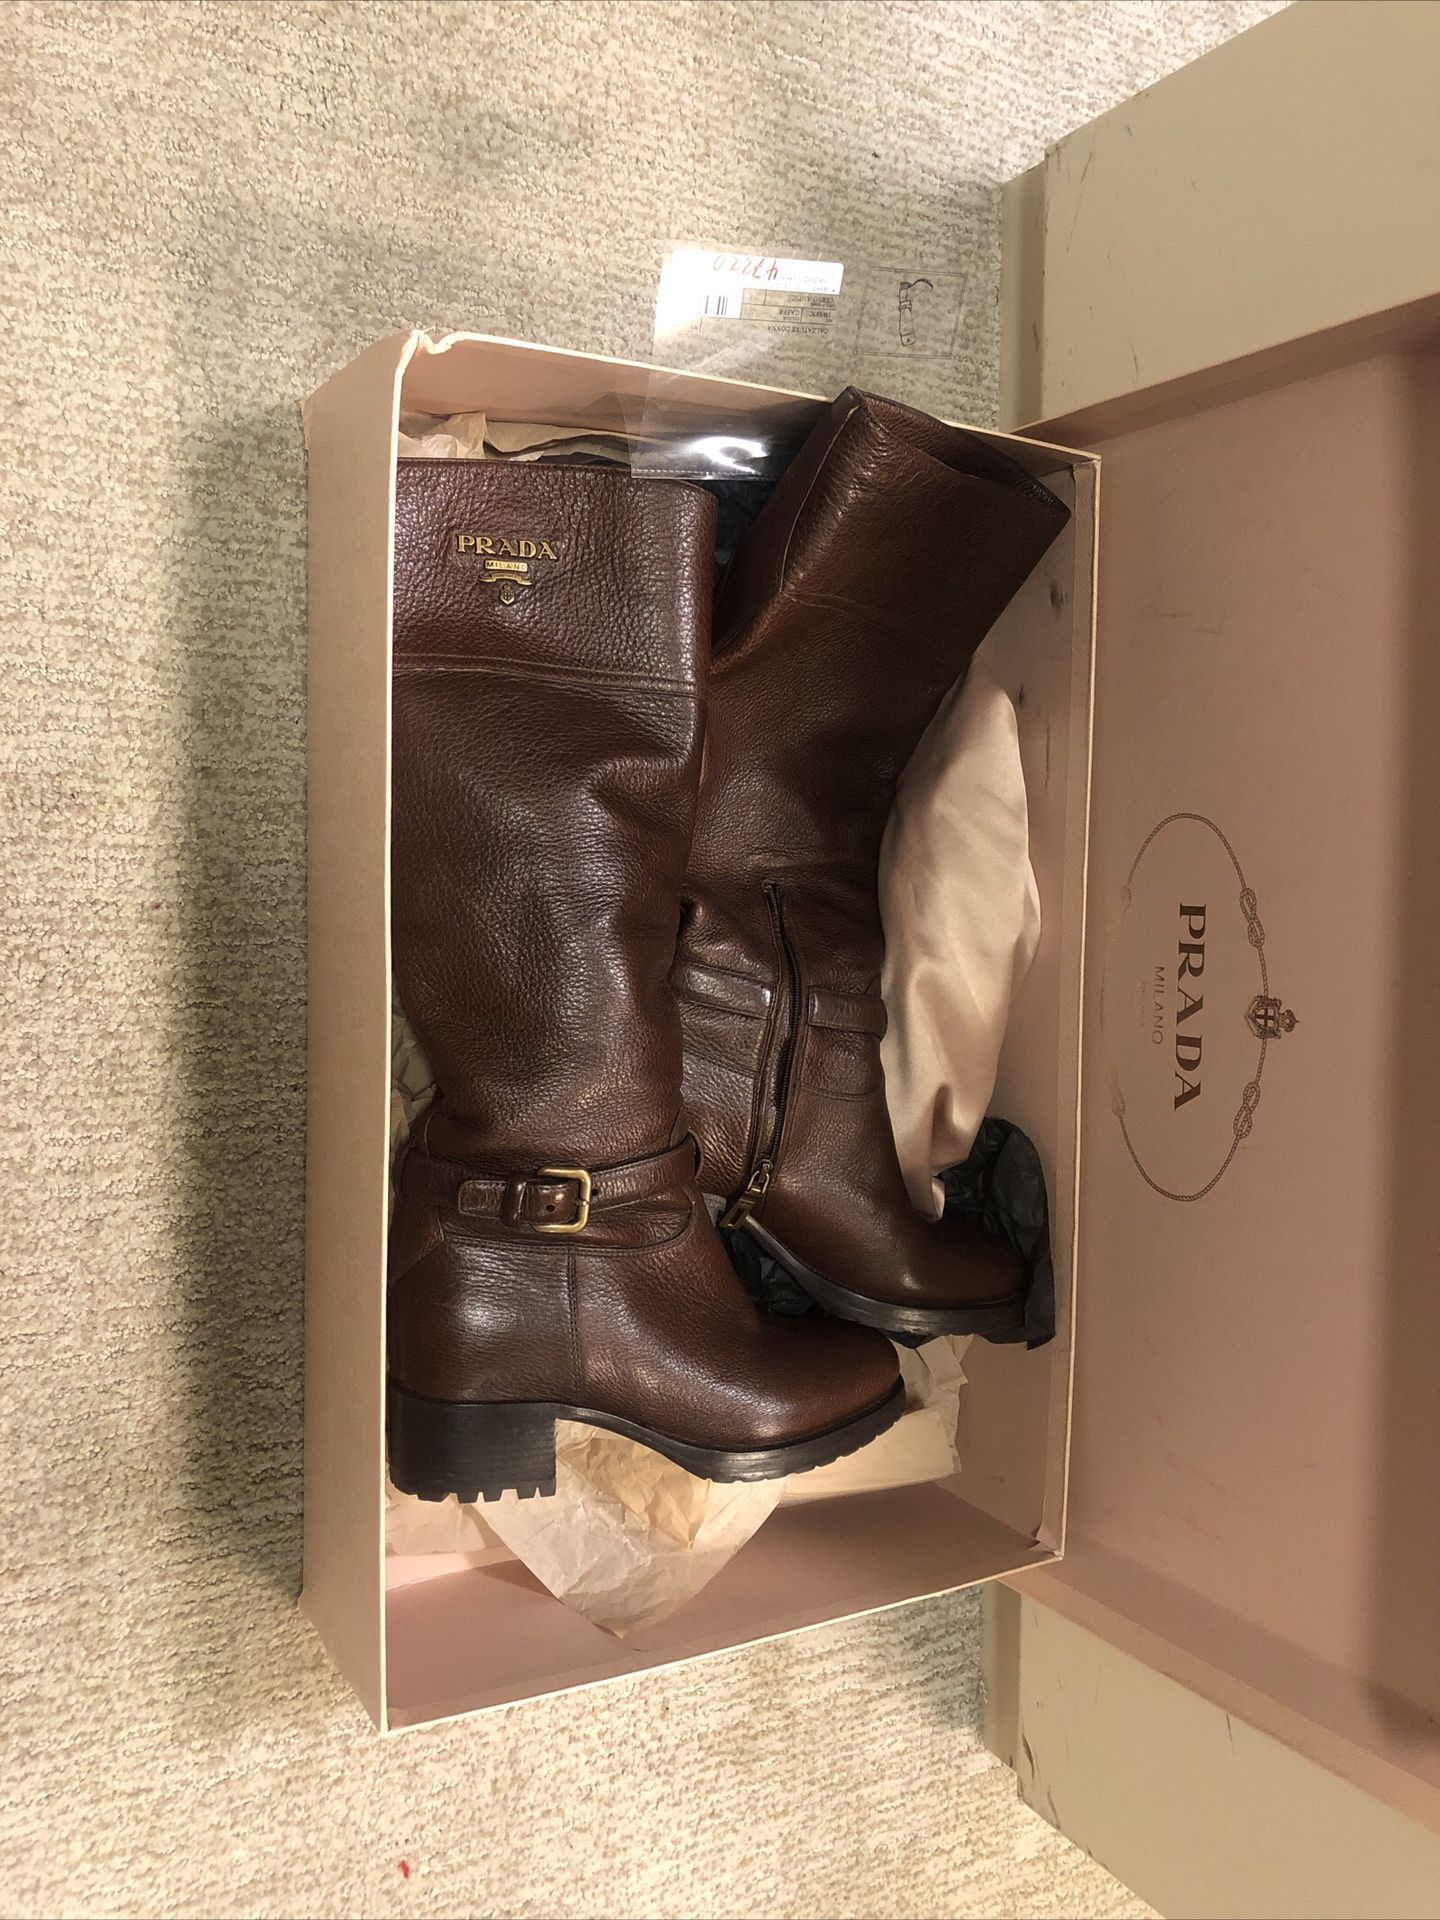 Prada Boots Size 37 for Sale in Dallas, TX - OfferUp